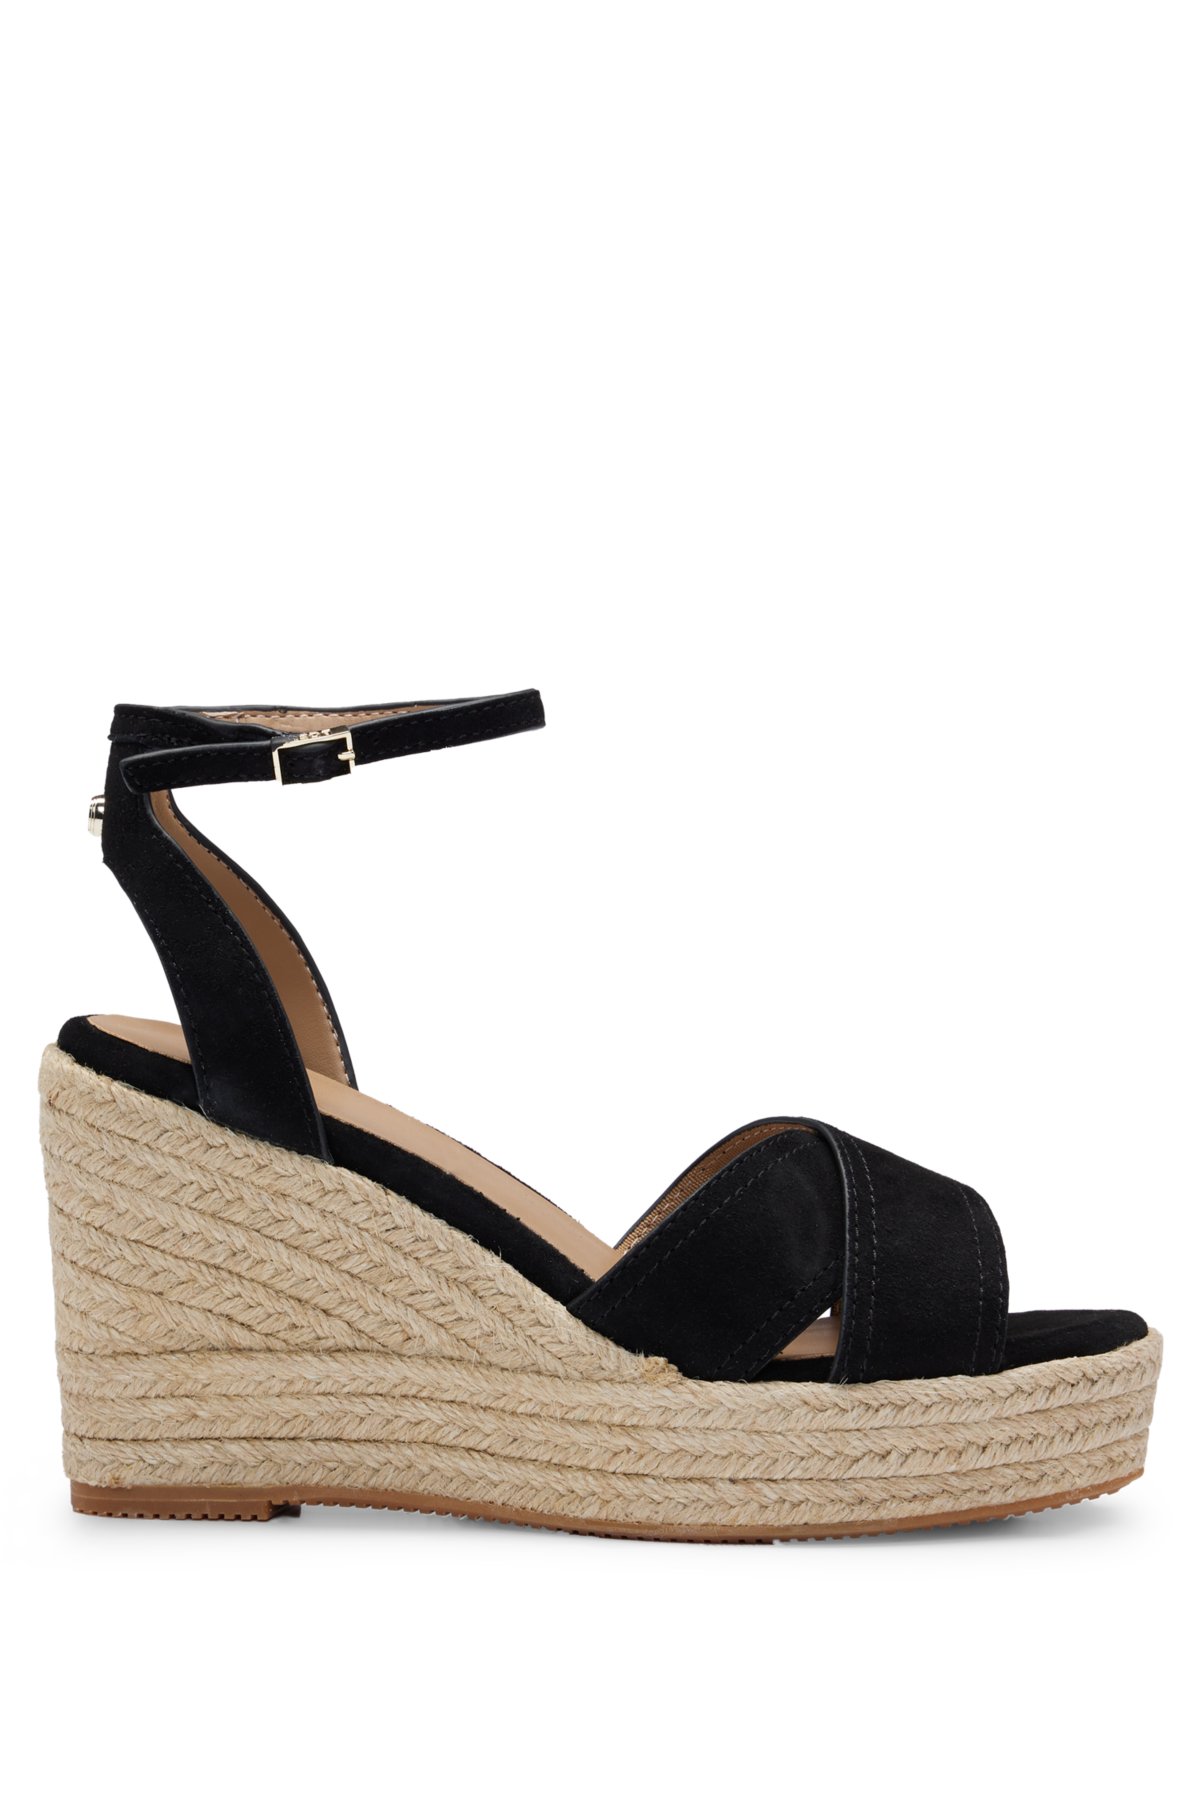 Suede wedge sandals with ankle strap, Black